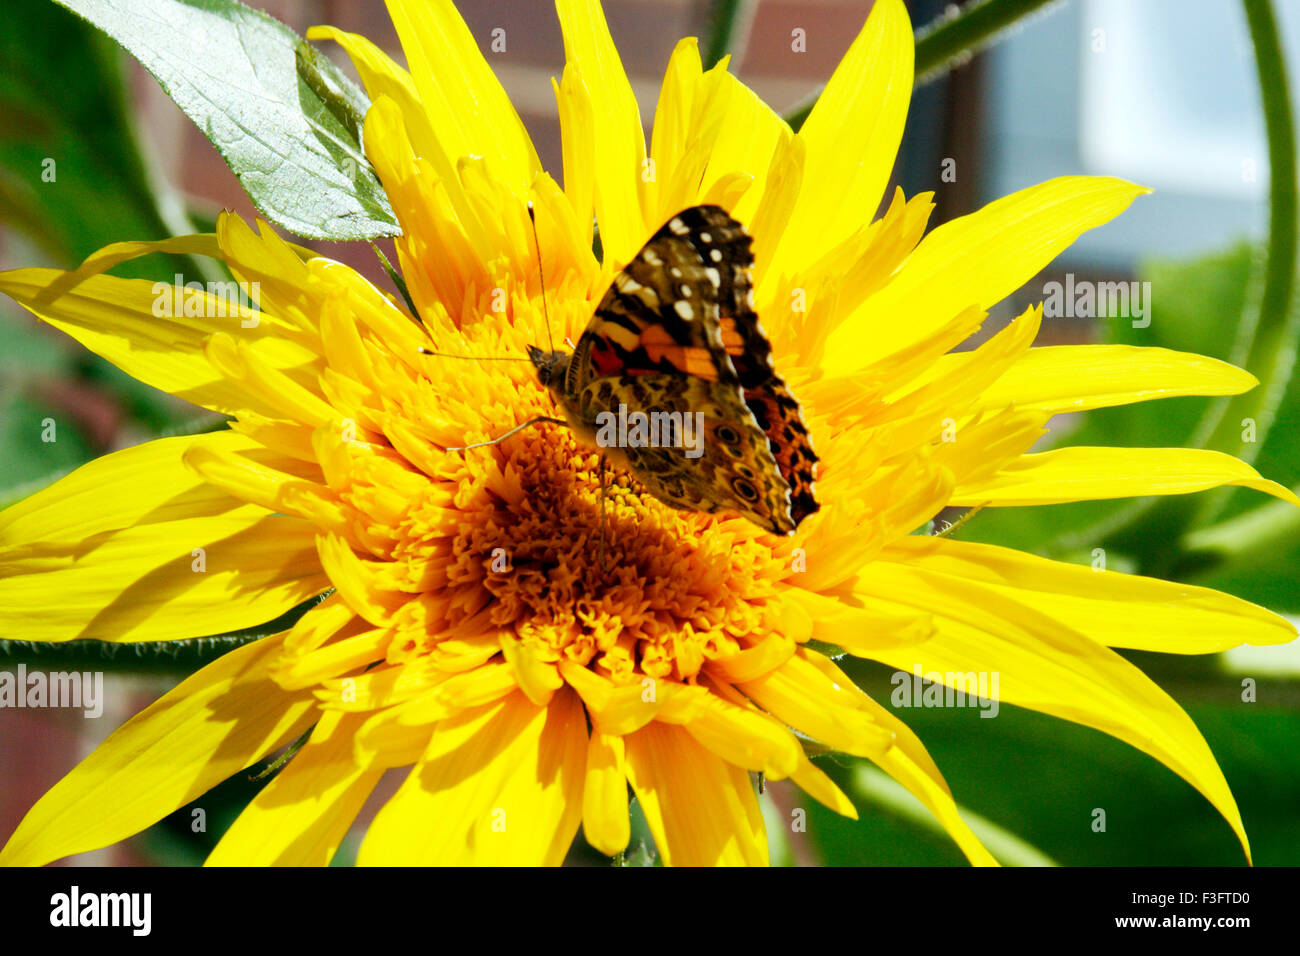 Butterfly name the Indian admiral on a sunflower Stock Photo